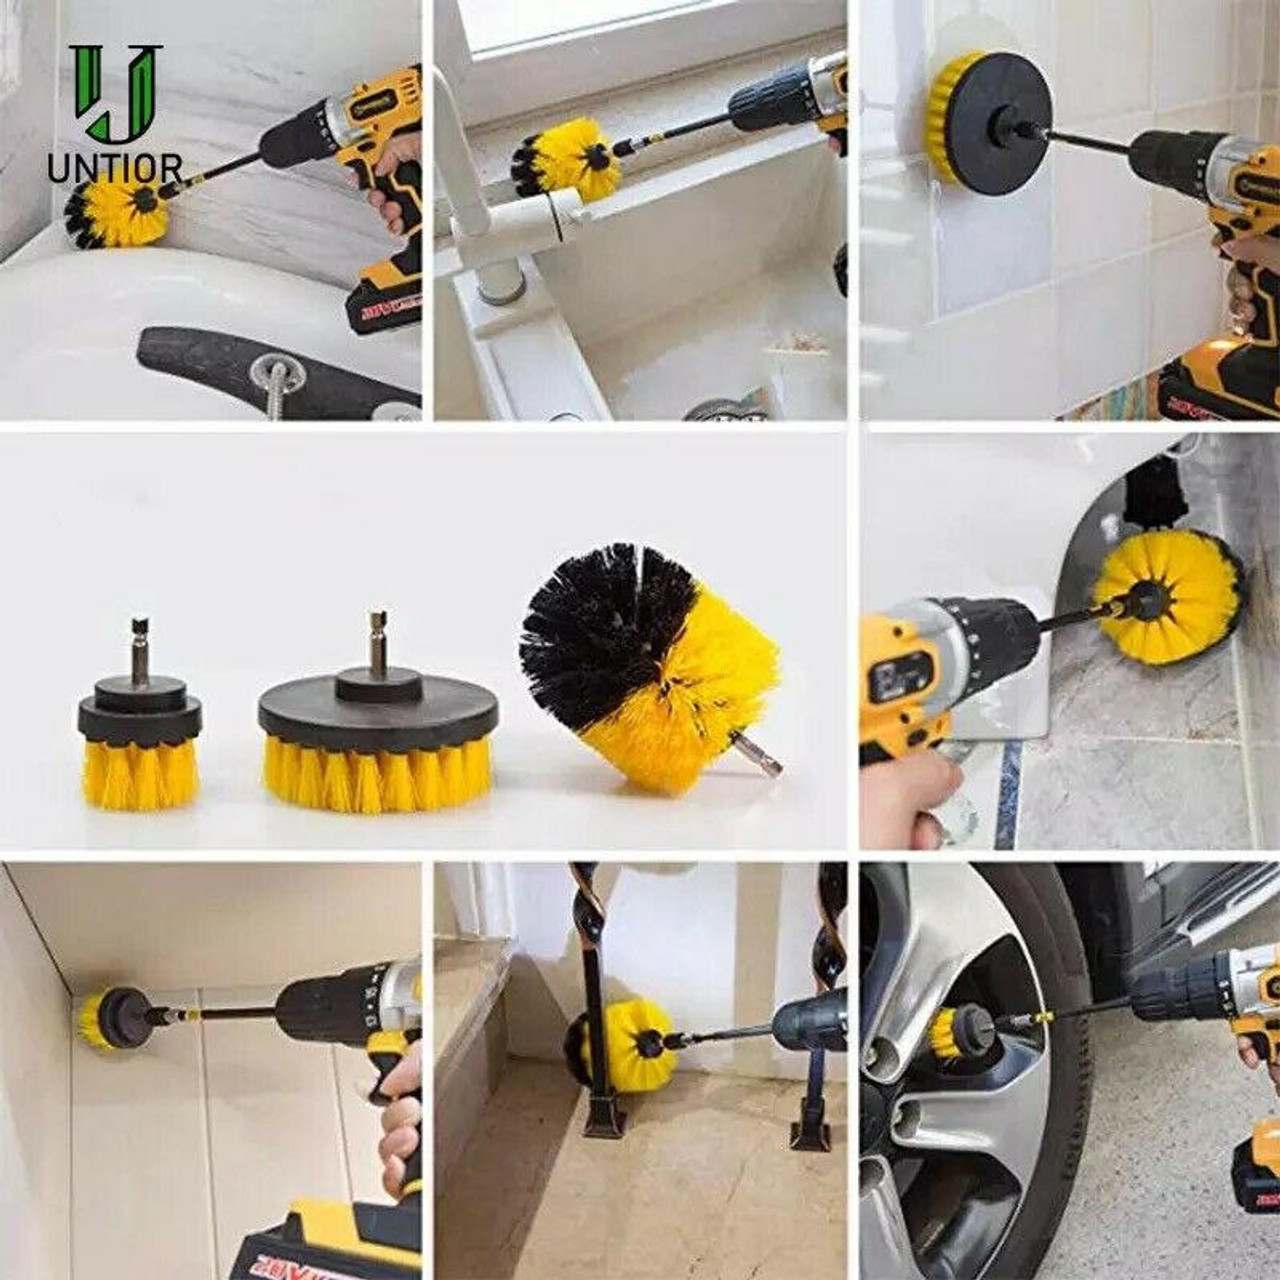 https://cdn11.bigcommerce.com/s-zrh8tkpr8d/images/stencil/1280x1280/products/9953/32014/3pcs-drill-brush-power-scrubber-drill-attachments-for-carpet-tile-grout-cleaning__47239.1665665772.jpg?c=2